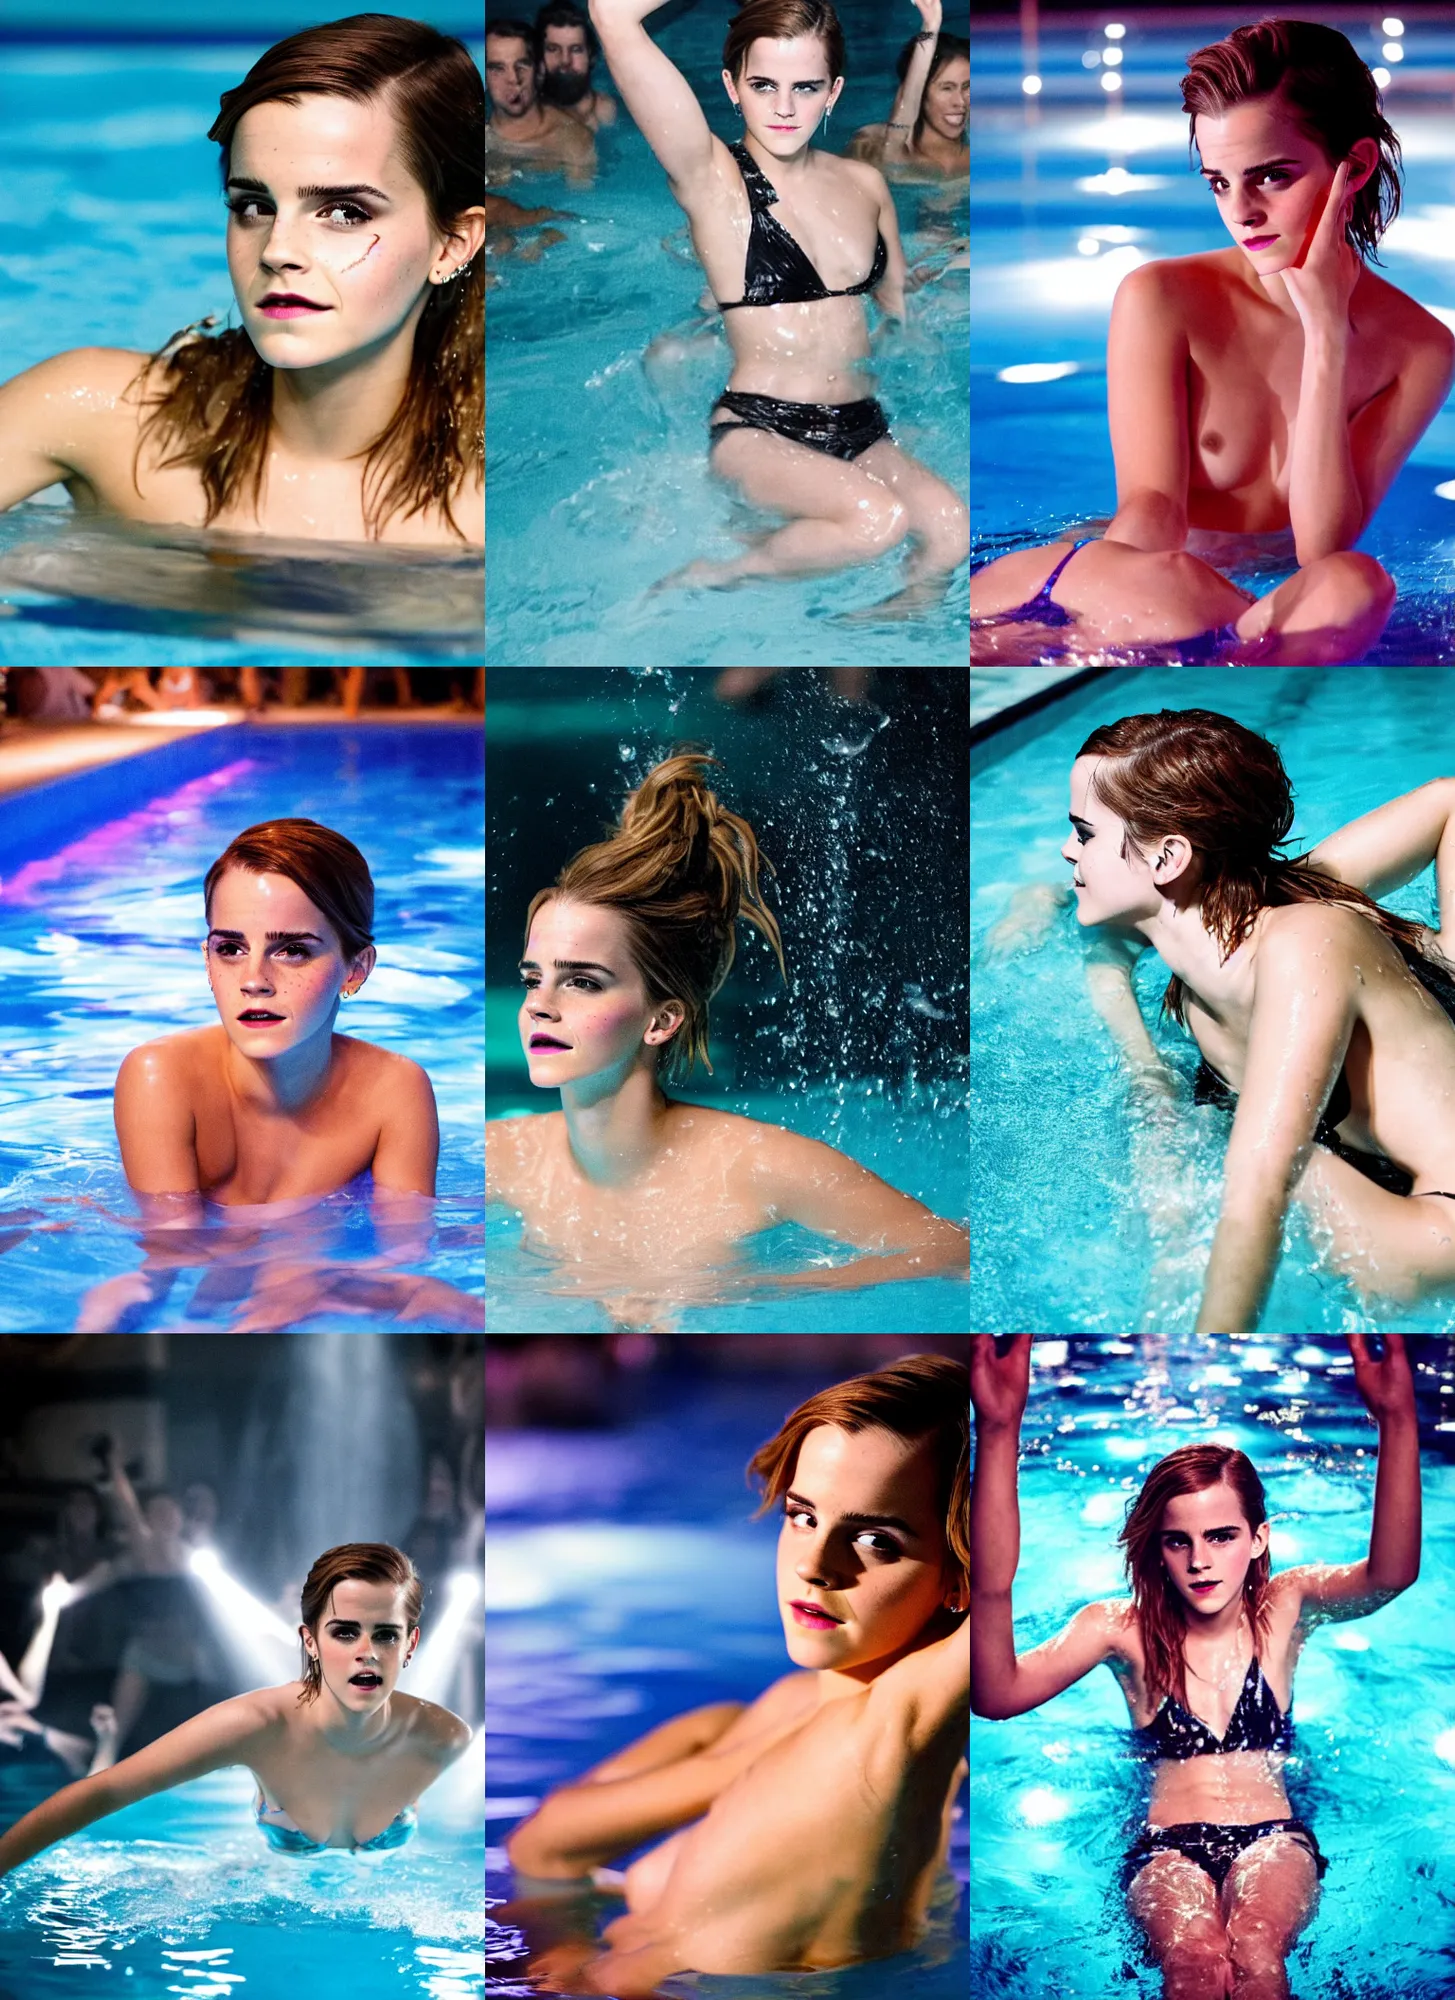 Prompt: a photo of crazy drunk emma watson partying hard in the water, having fun being the center of attention in a private crowded pool party in modern indoors pool with cyberpunk lighting at night. sensual photo. symmetrical balance, in - frame. photorealistic